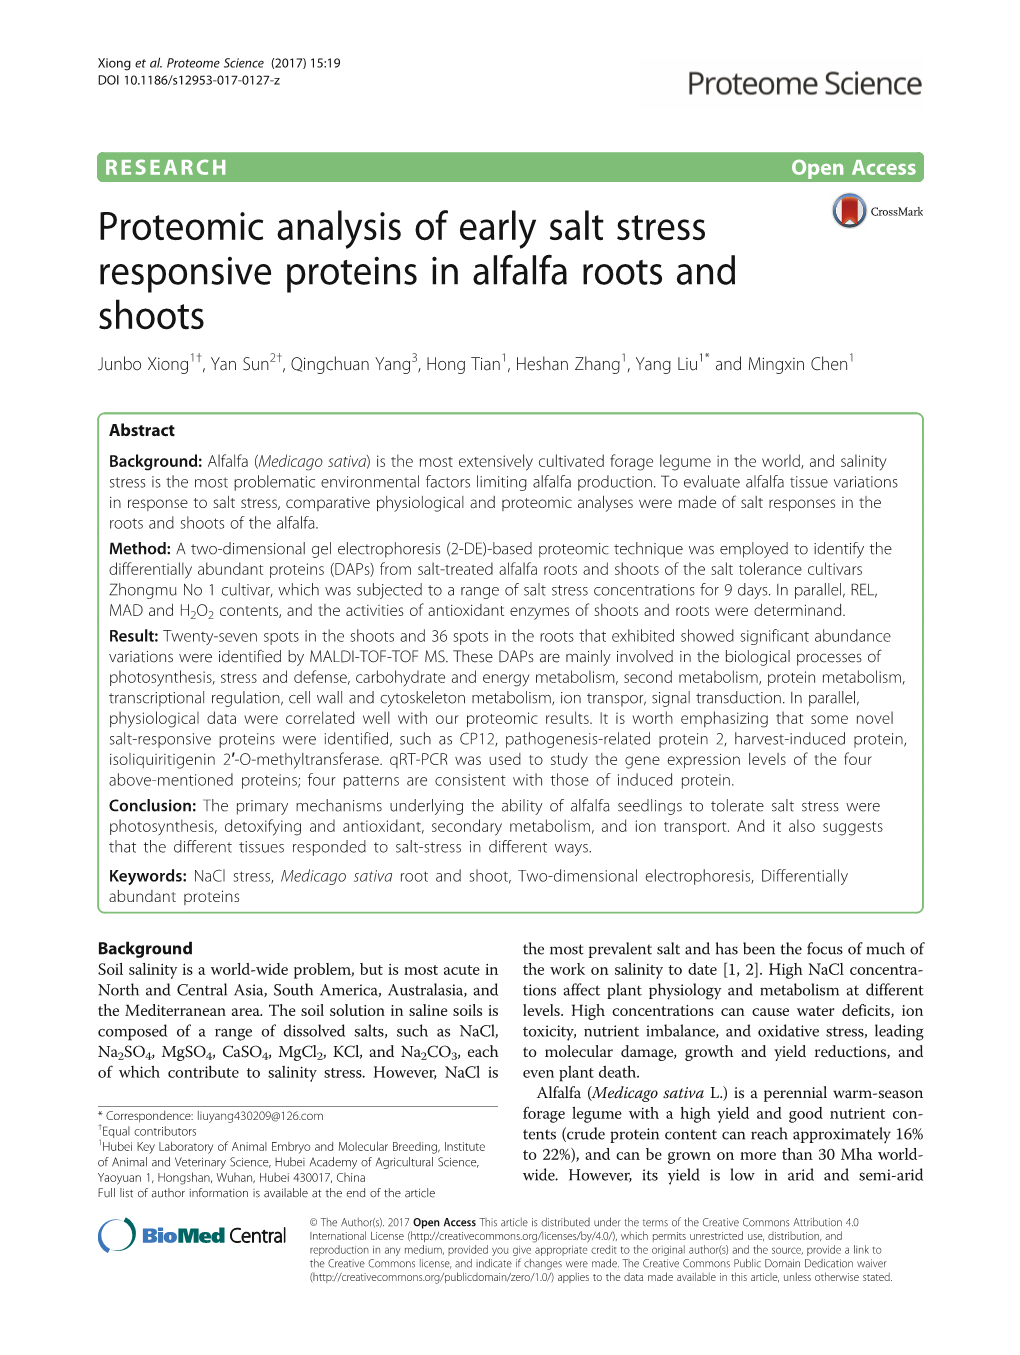 Proteomic Analysis of Early Salt Stress Responsive Proteins in Alfalfa Roots and Shoots